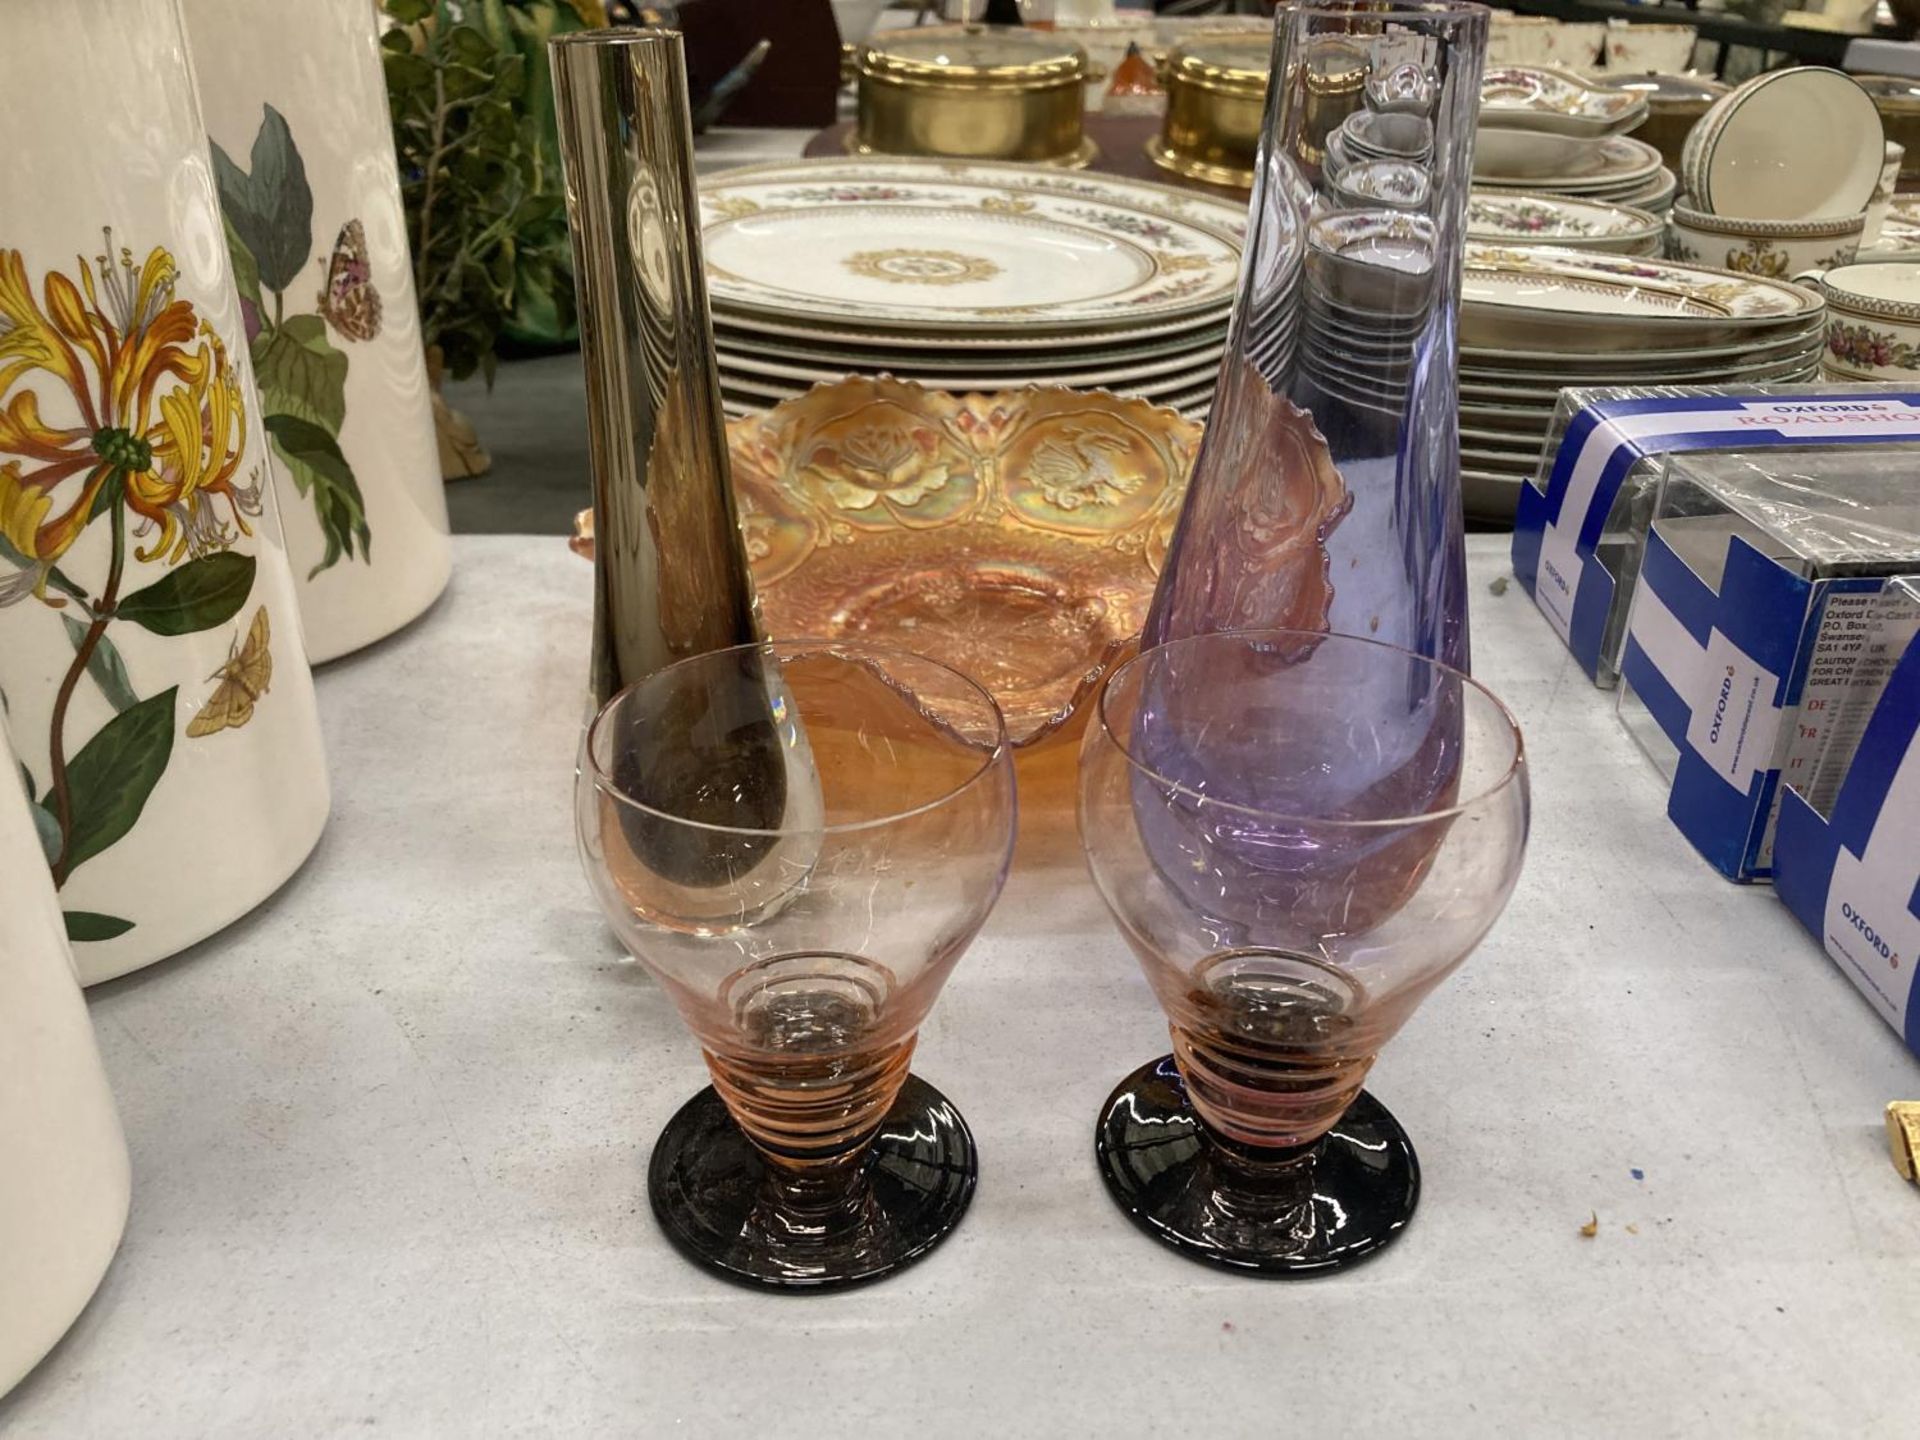 A QUANTITY OF GLASSWARE TO INCLUDE A CARNIVAL GLASS BOWL, VASES AND GLASSES - Image 2 of 3